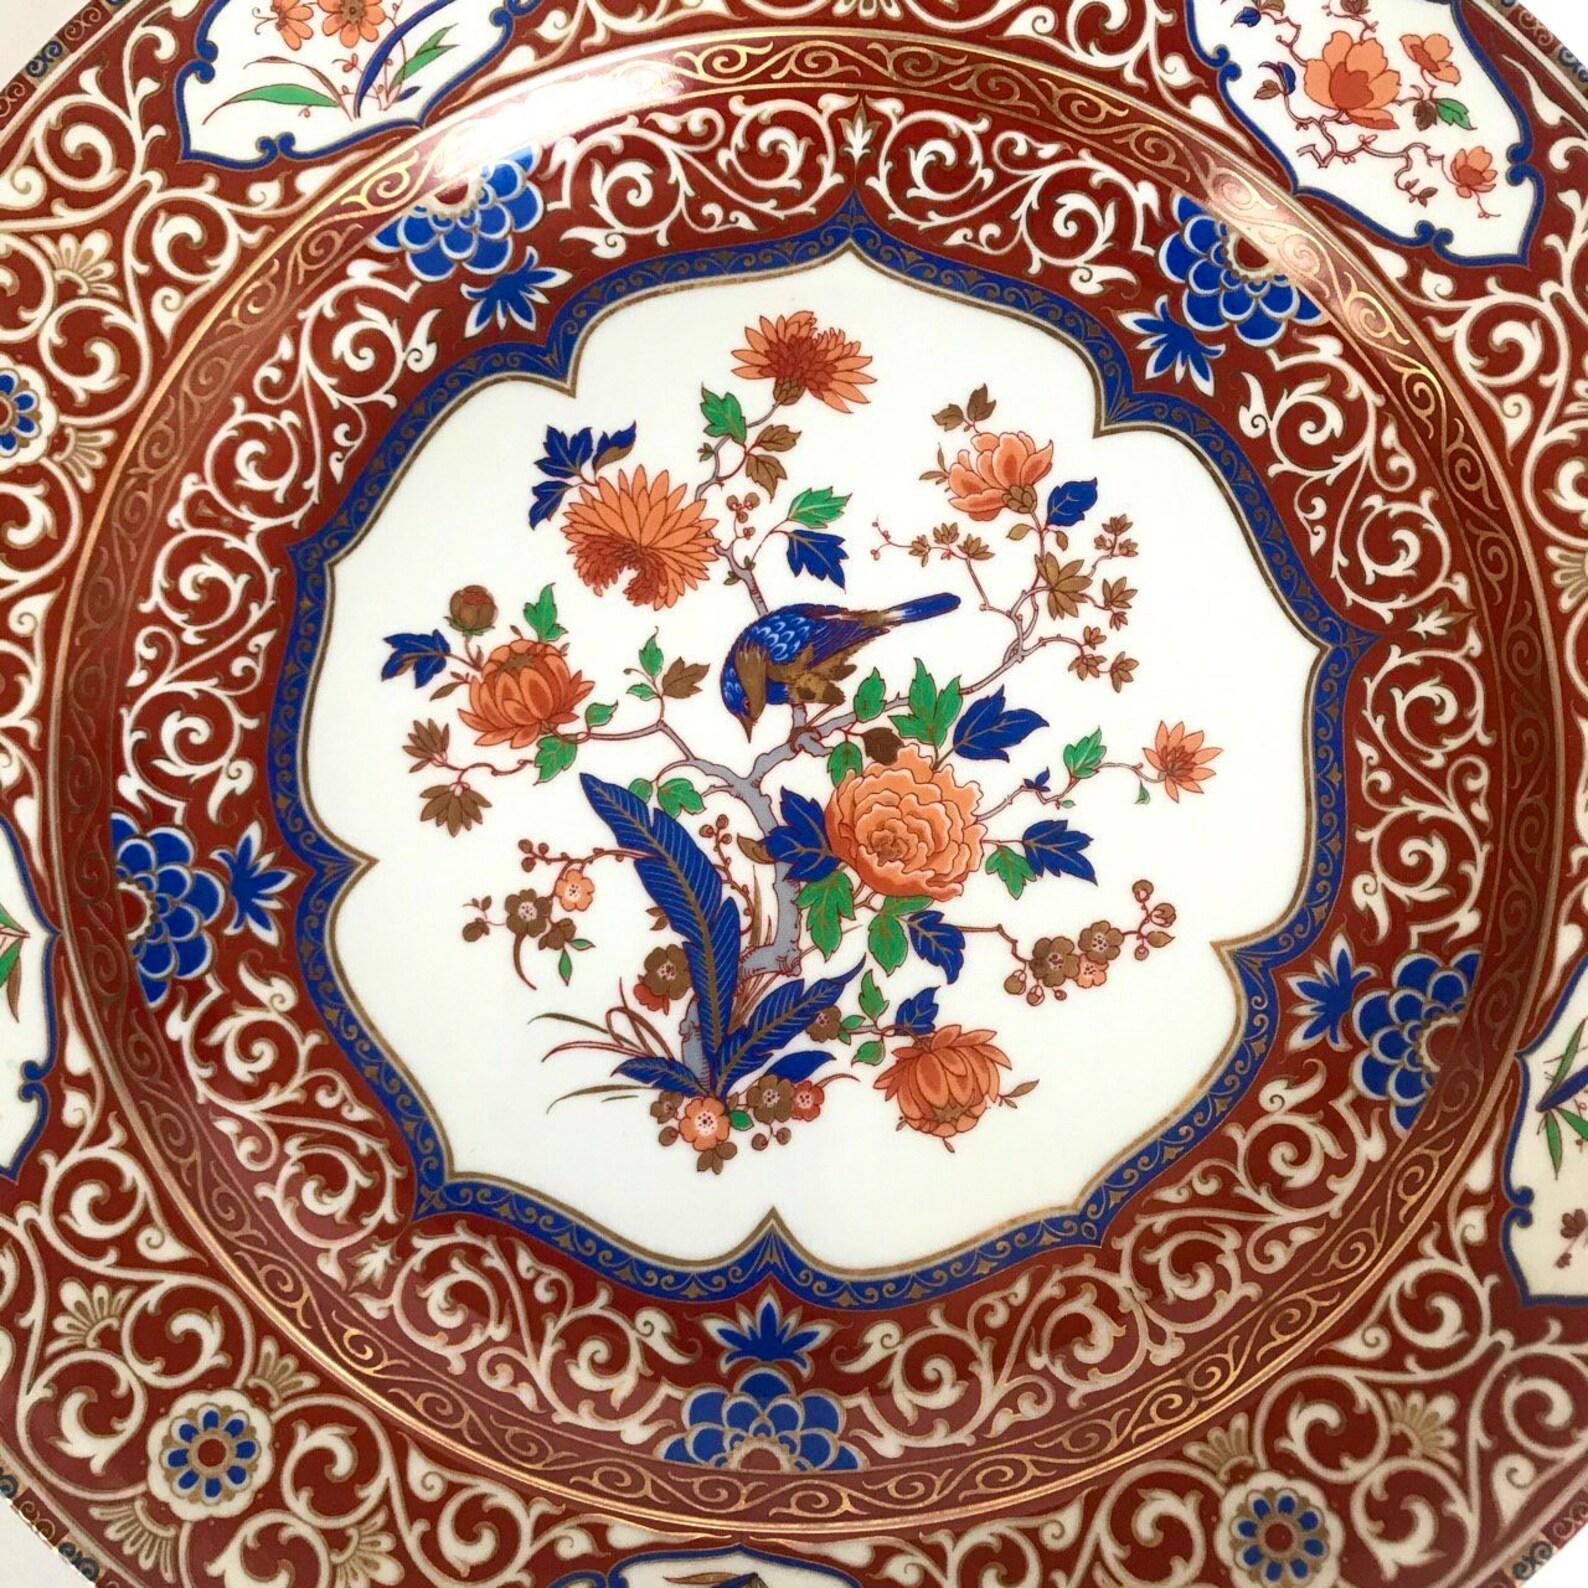 Vintage big Kaiser plate “Ming” collection.

Famous West Germany Manufacture Kaiser.

Time-Tasted high quality porcelain.

Beautiful Collection “Ming” famous for its beautiful decor in the form of flowers and birds. 

The orange color,